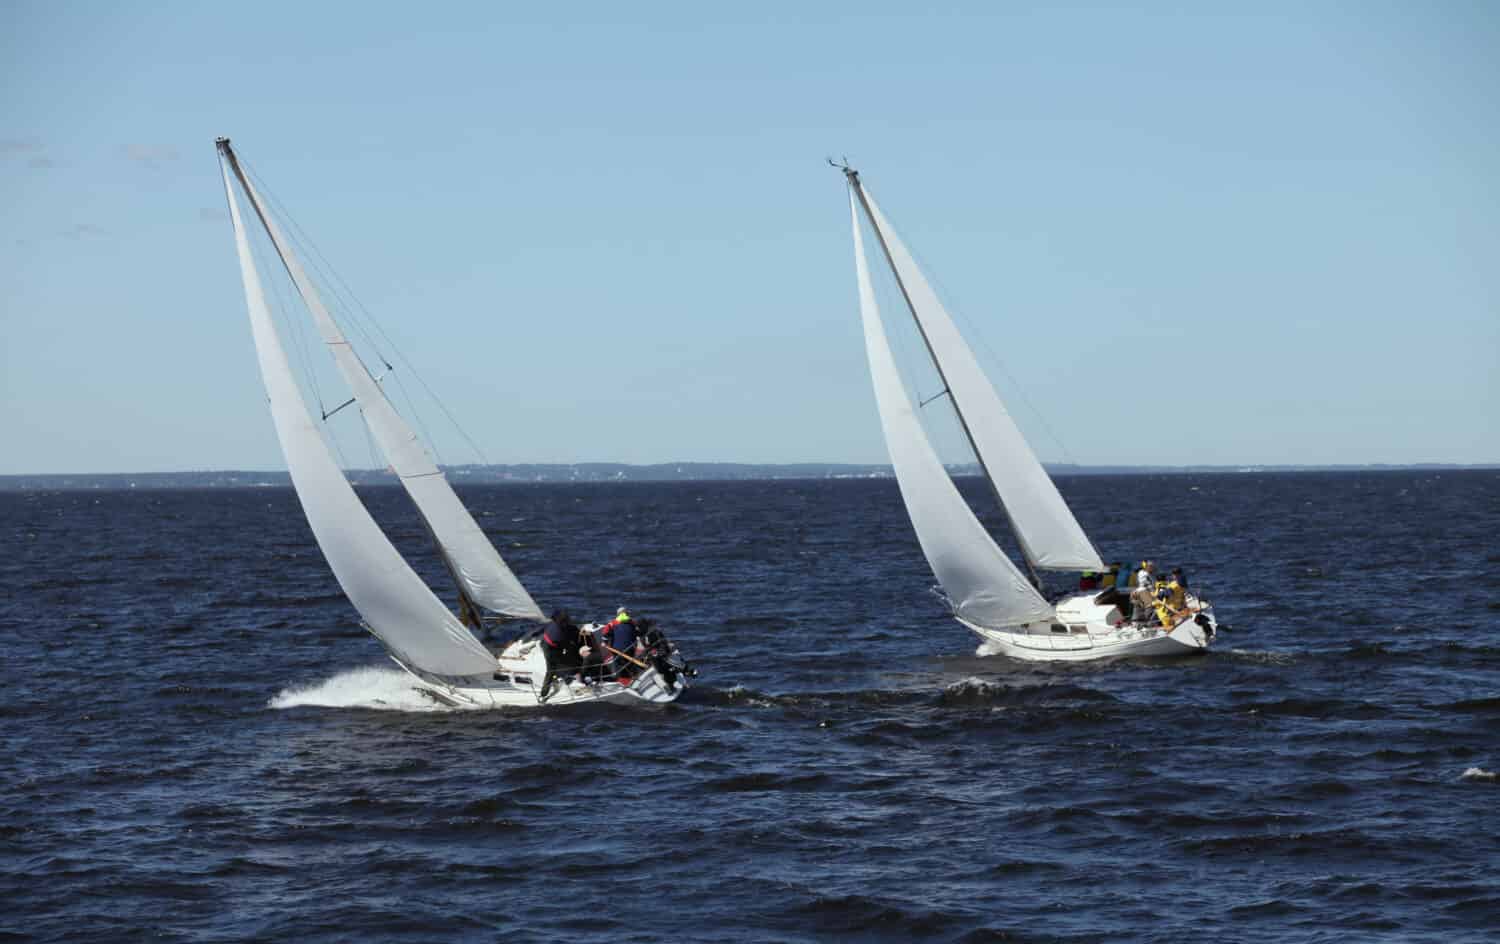 The wind at their back, sailors ride the tailwind, leveraging its favorable direction to sail swiftly and smoothly across the waters.